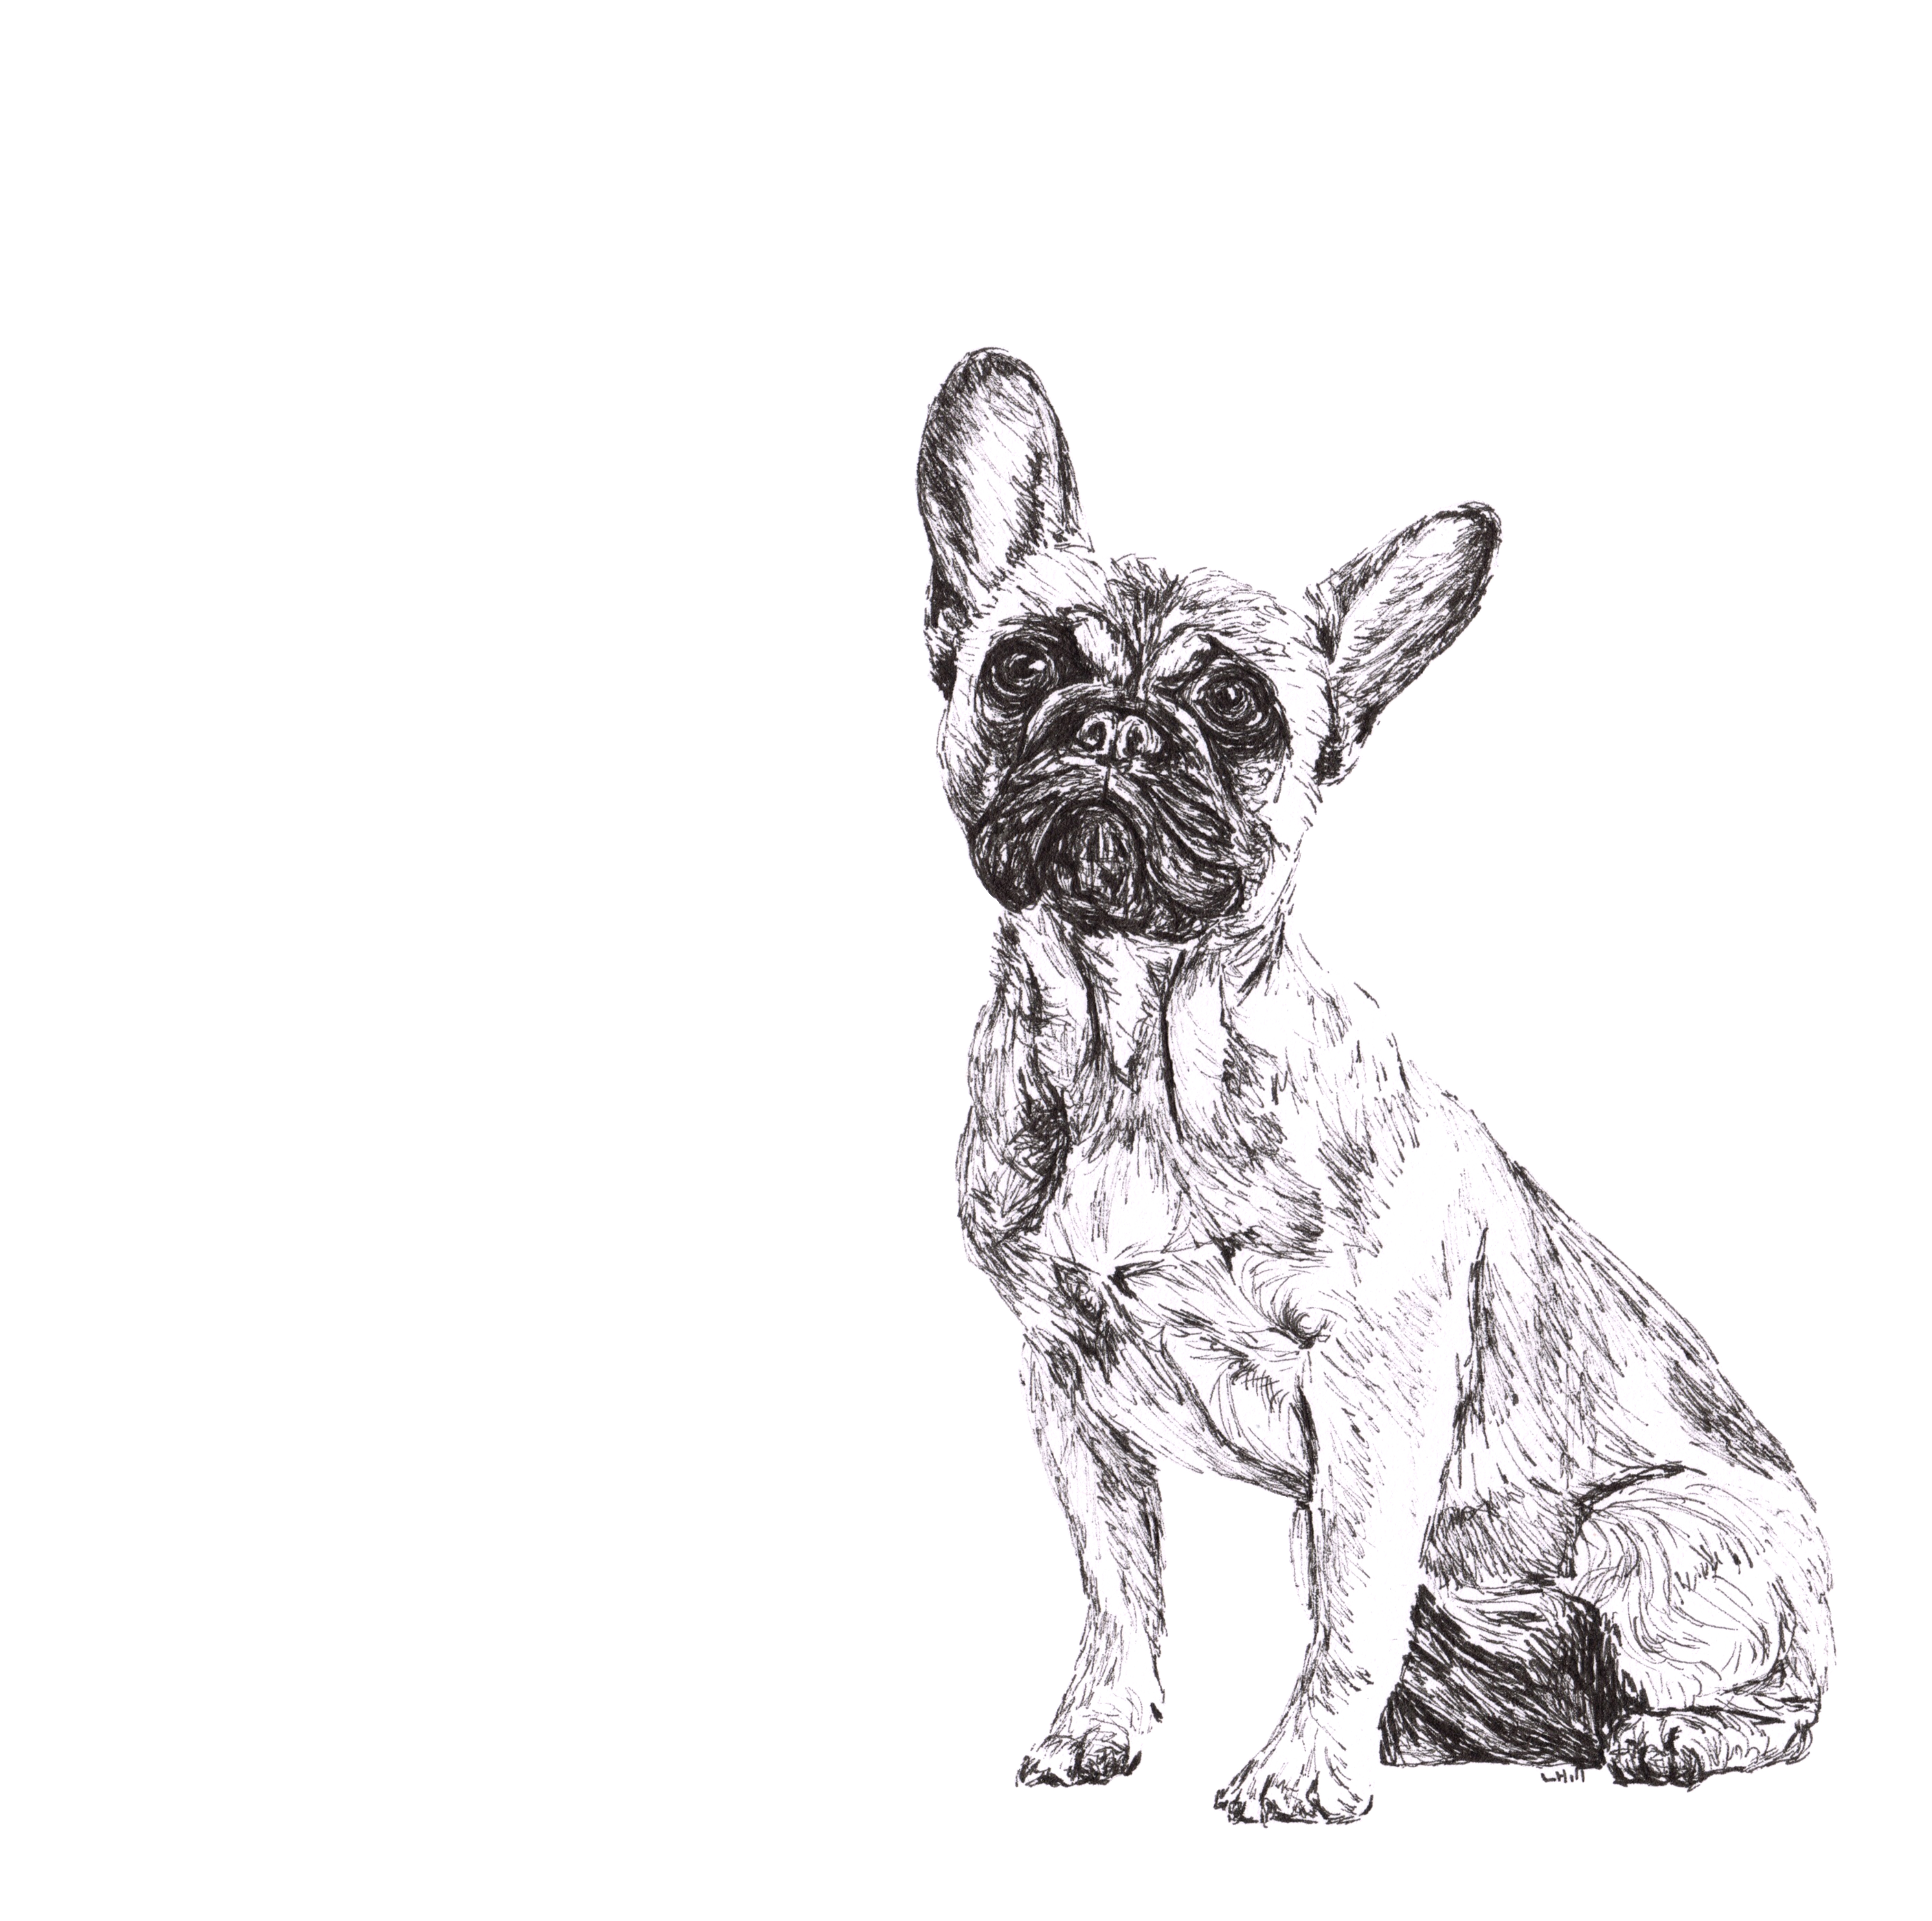 French Bulldog pen and ink illustration by Louisa Hill